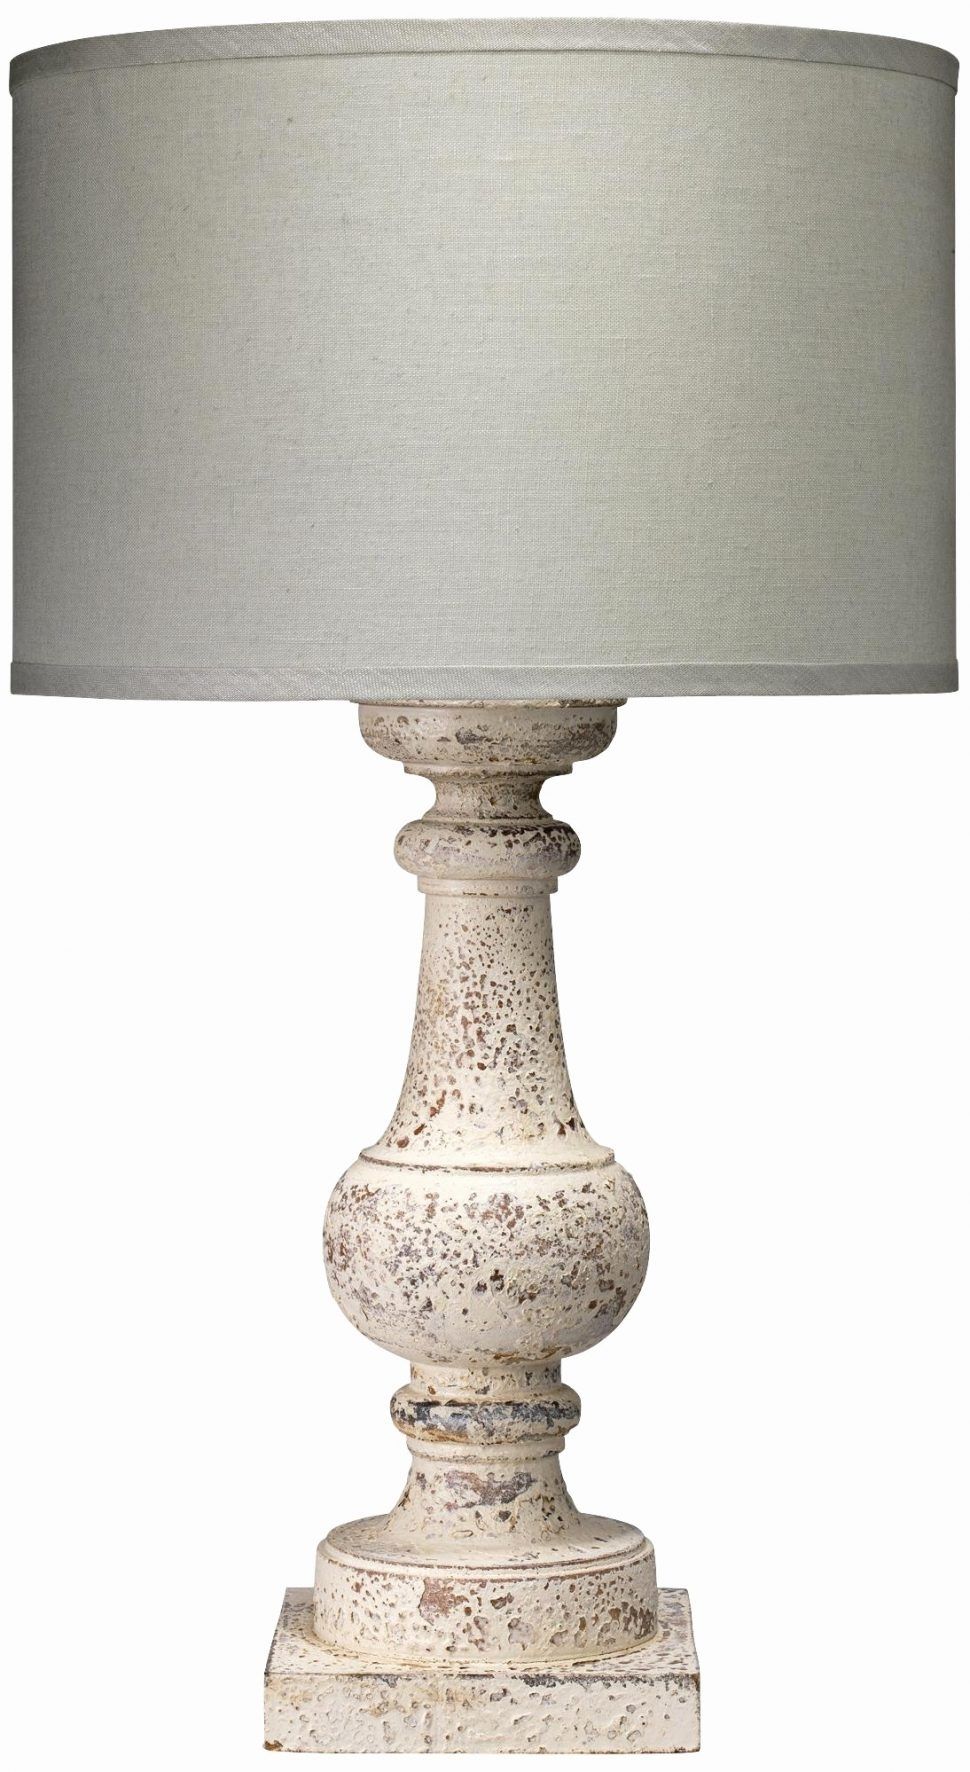 Lamp : Living Room Table Lamps Creative Design Picture Target New For Country Living Room Table Lamps (View 10 of 15)